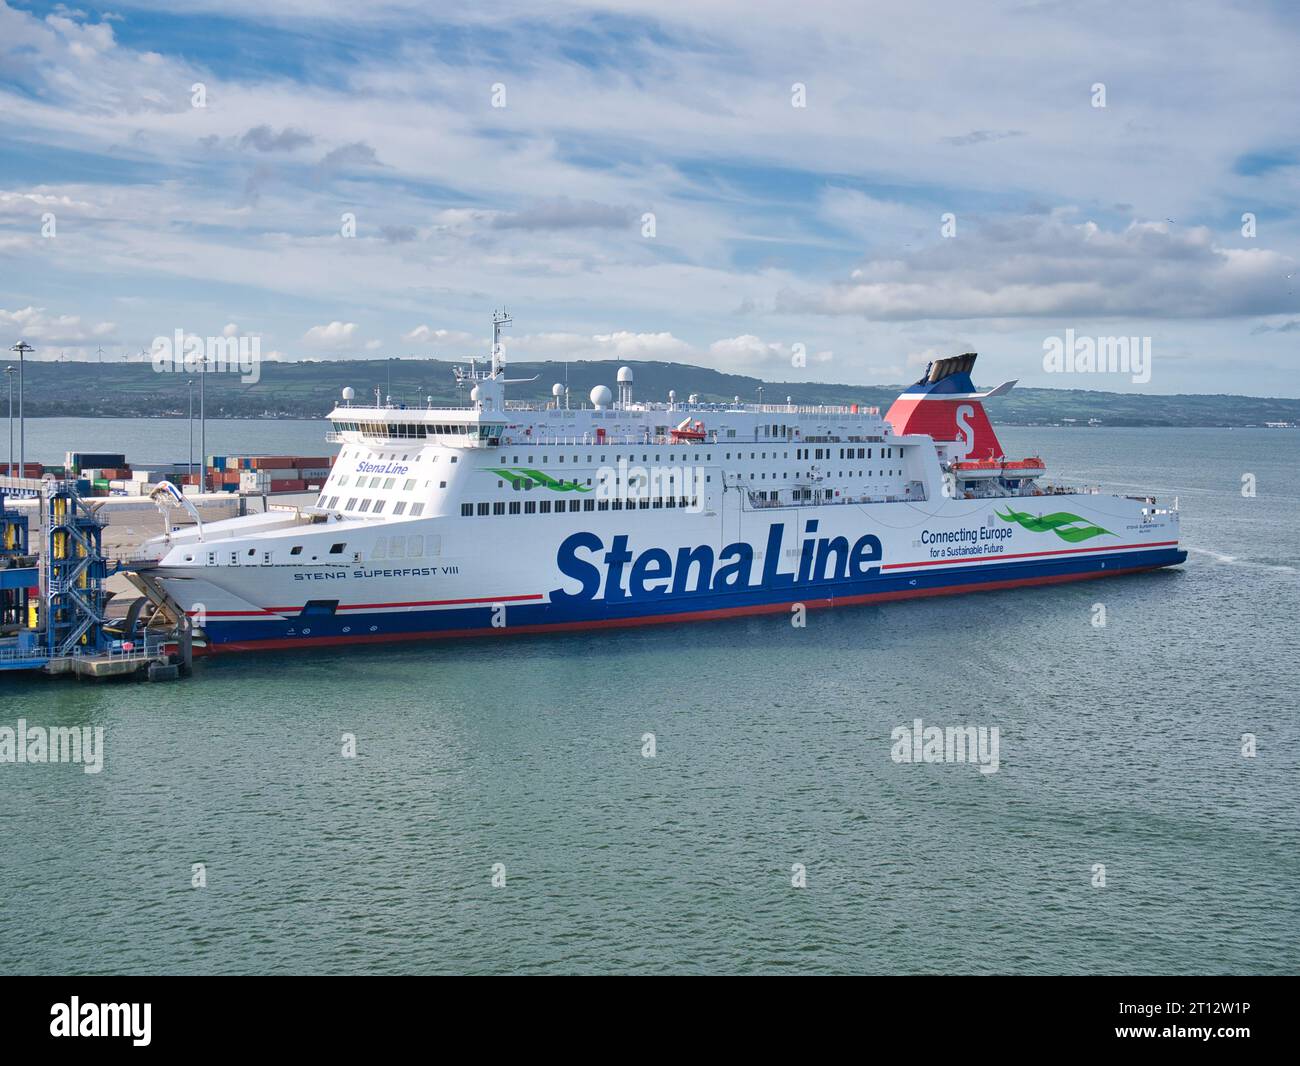 The Stena Line  Ro-Pax ferry Stena Superfast VIII moored at the Port of Belfast, Northern Ireland. The ship operates on the Belfast - Cairnryan route Stock Photo